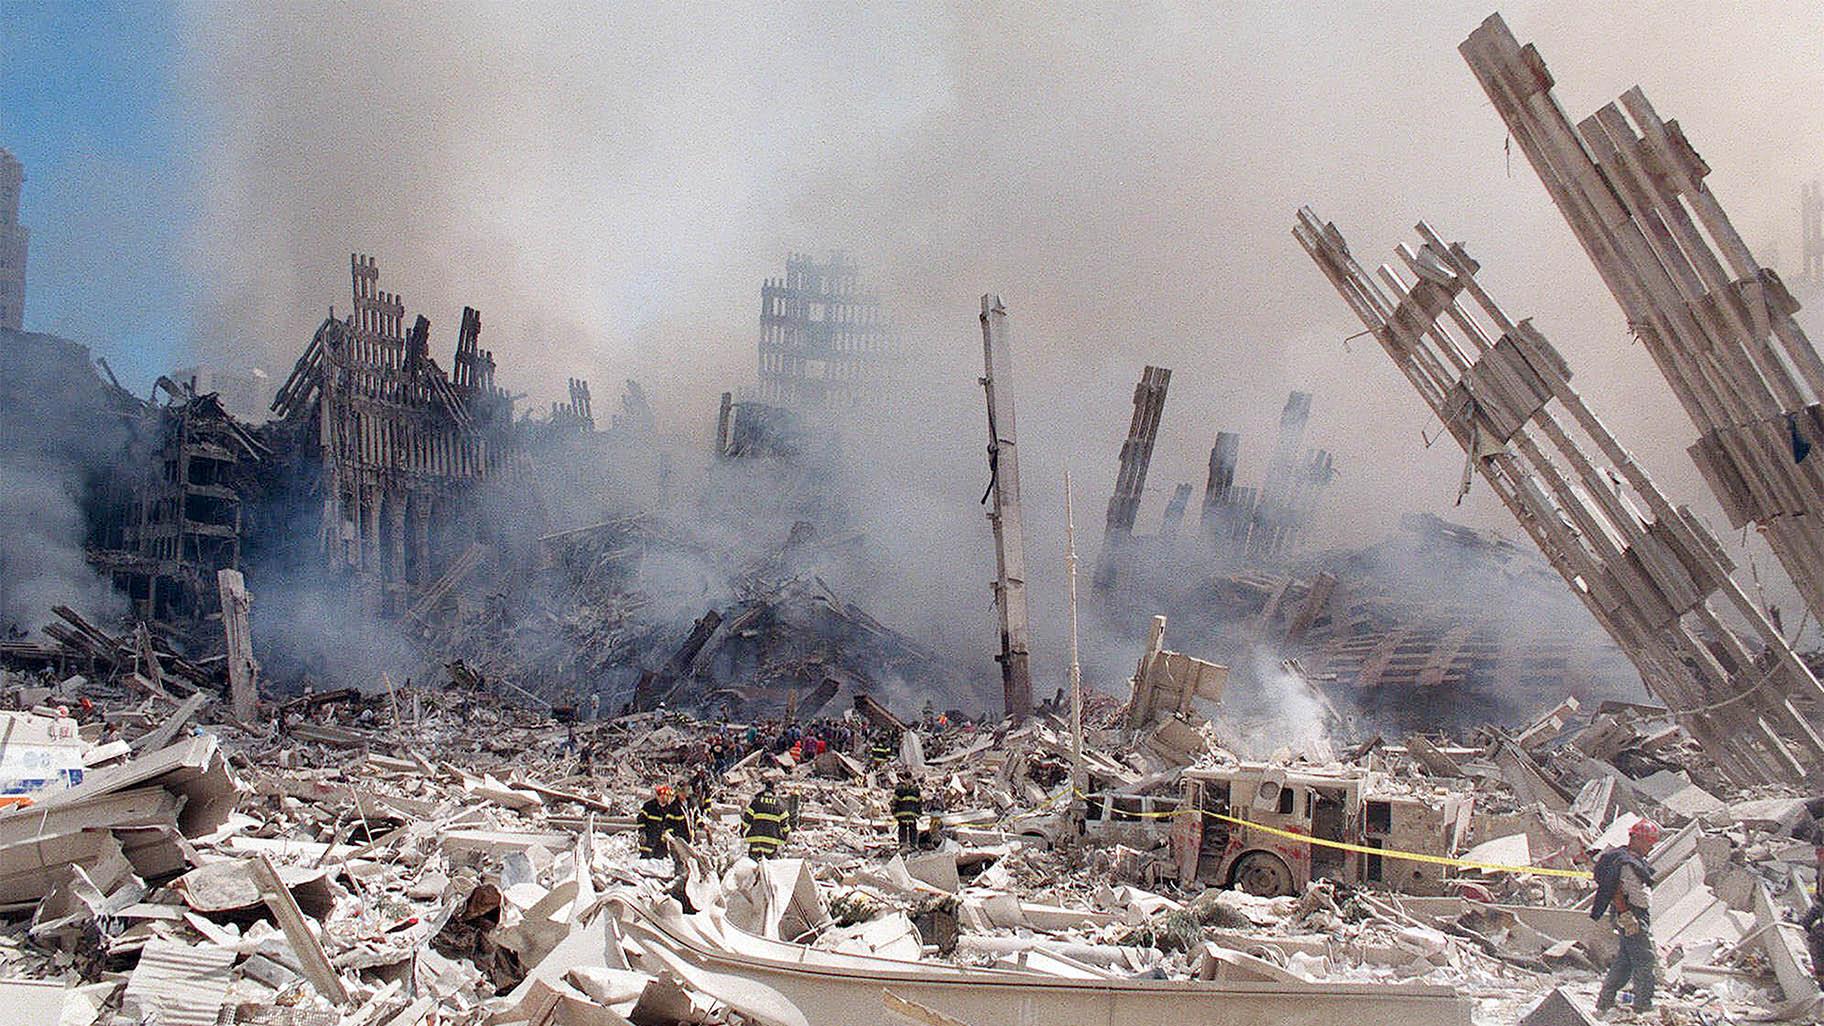 In this Sept. 12, 2001 file photo, firefighters work in the rubble of the World Trade Center towers in New York. (AP Photo / Virgil Case, File)